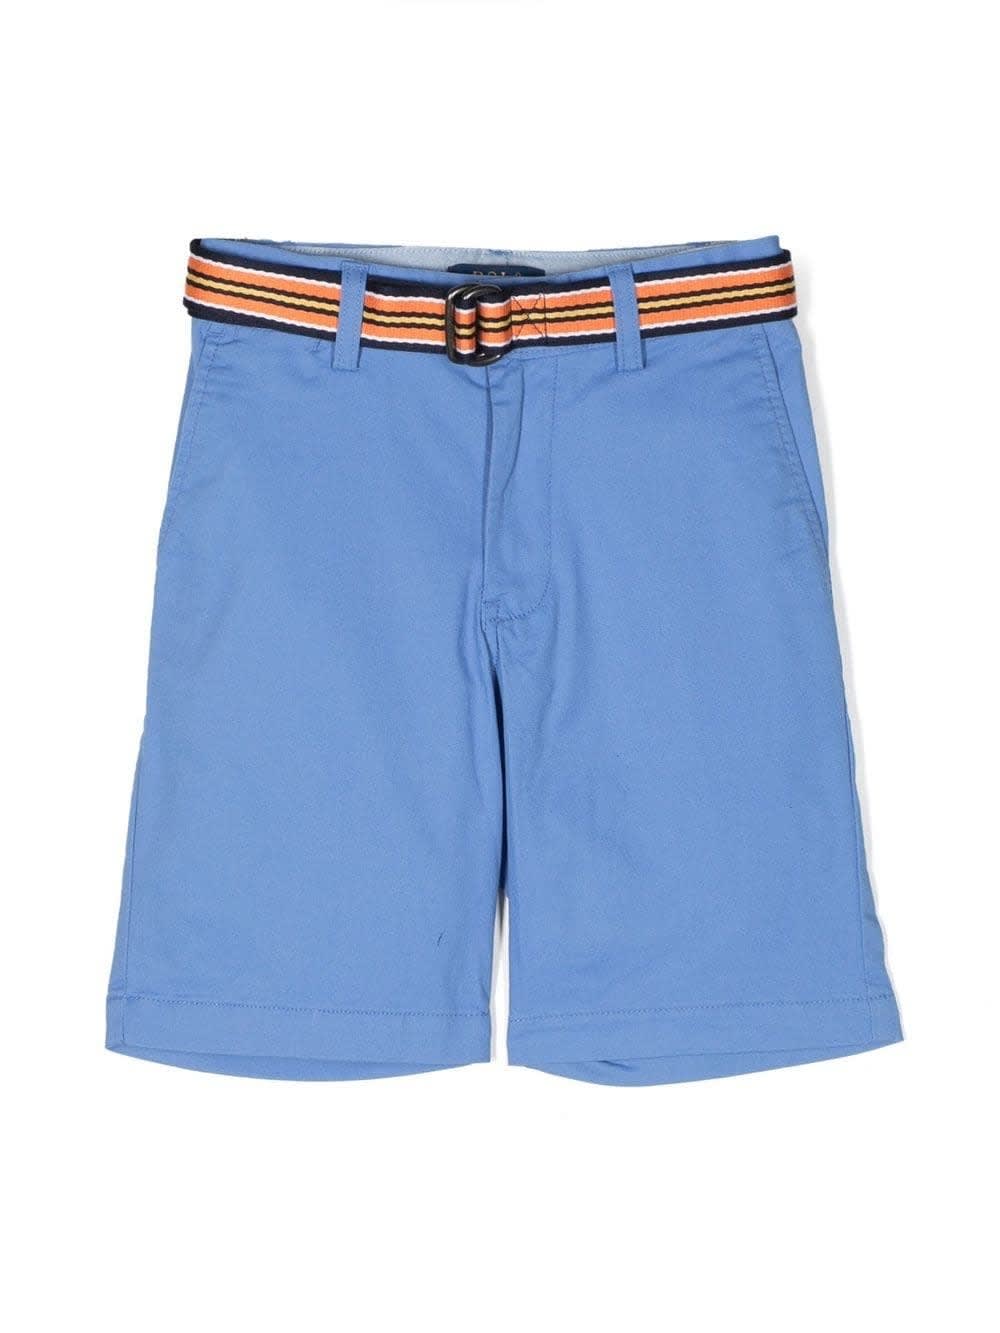 RALPH LAUREN SHORTS IN LIGHT BLUE STRETCH CHINO WITH BELT